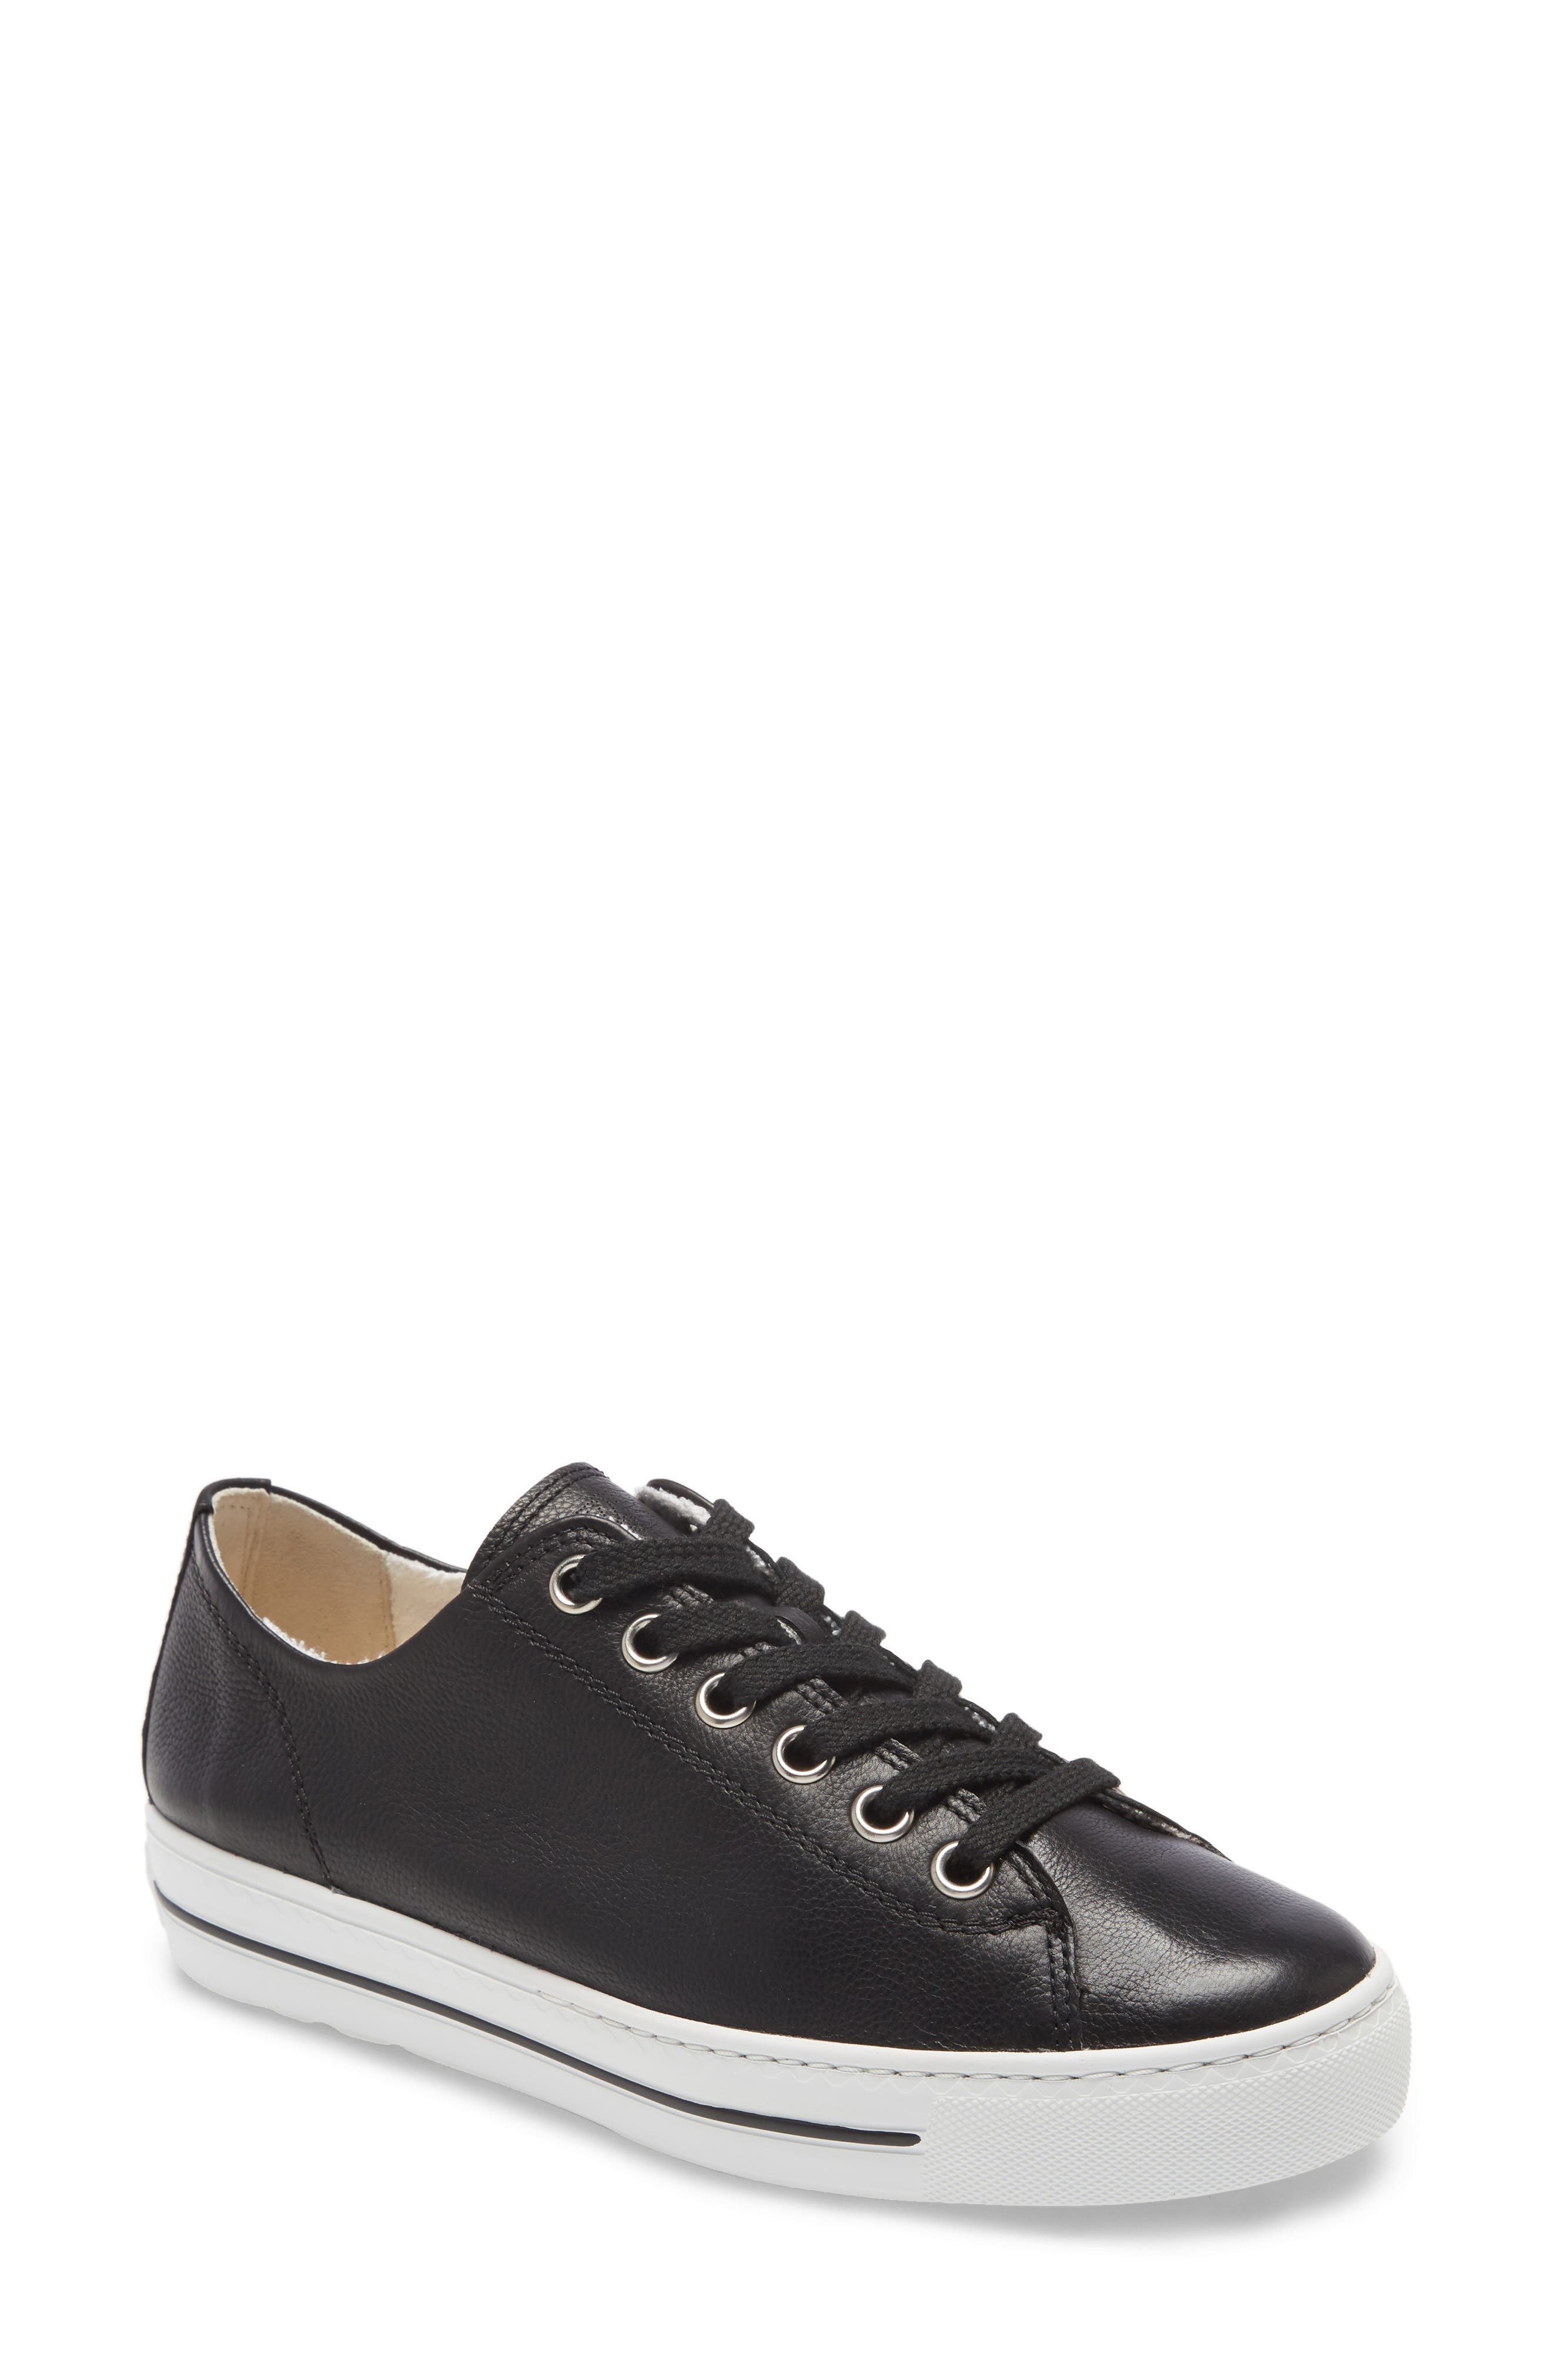 Paul Green Ally Leather Low Top Sneaker In Black Leather